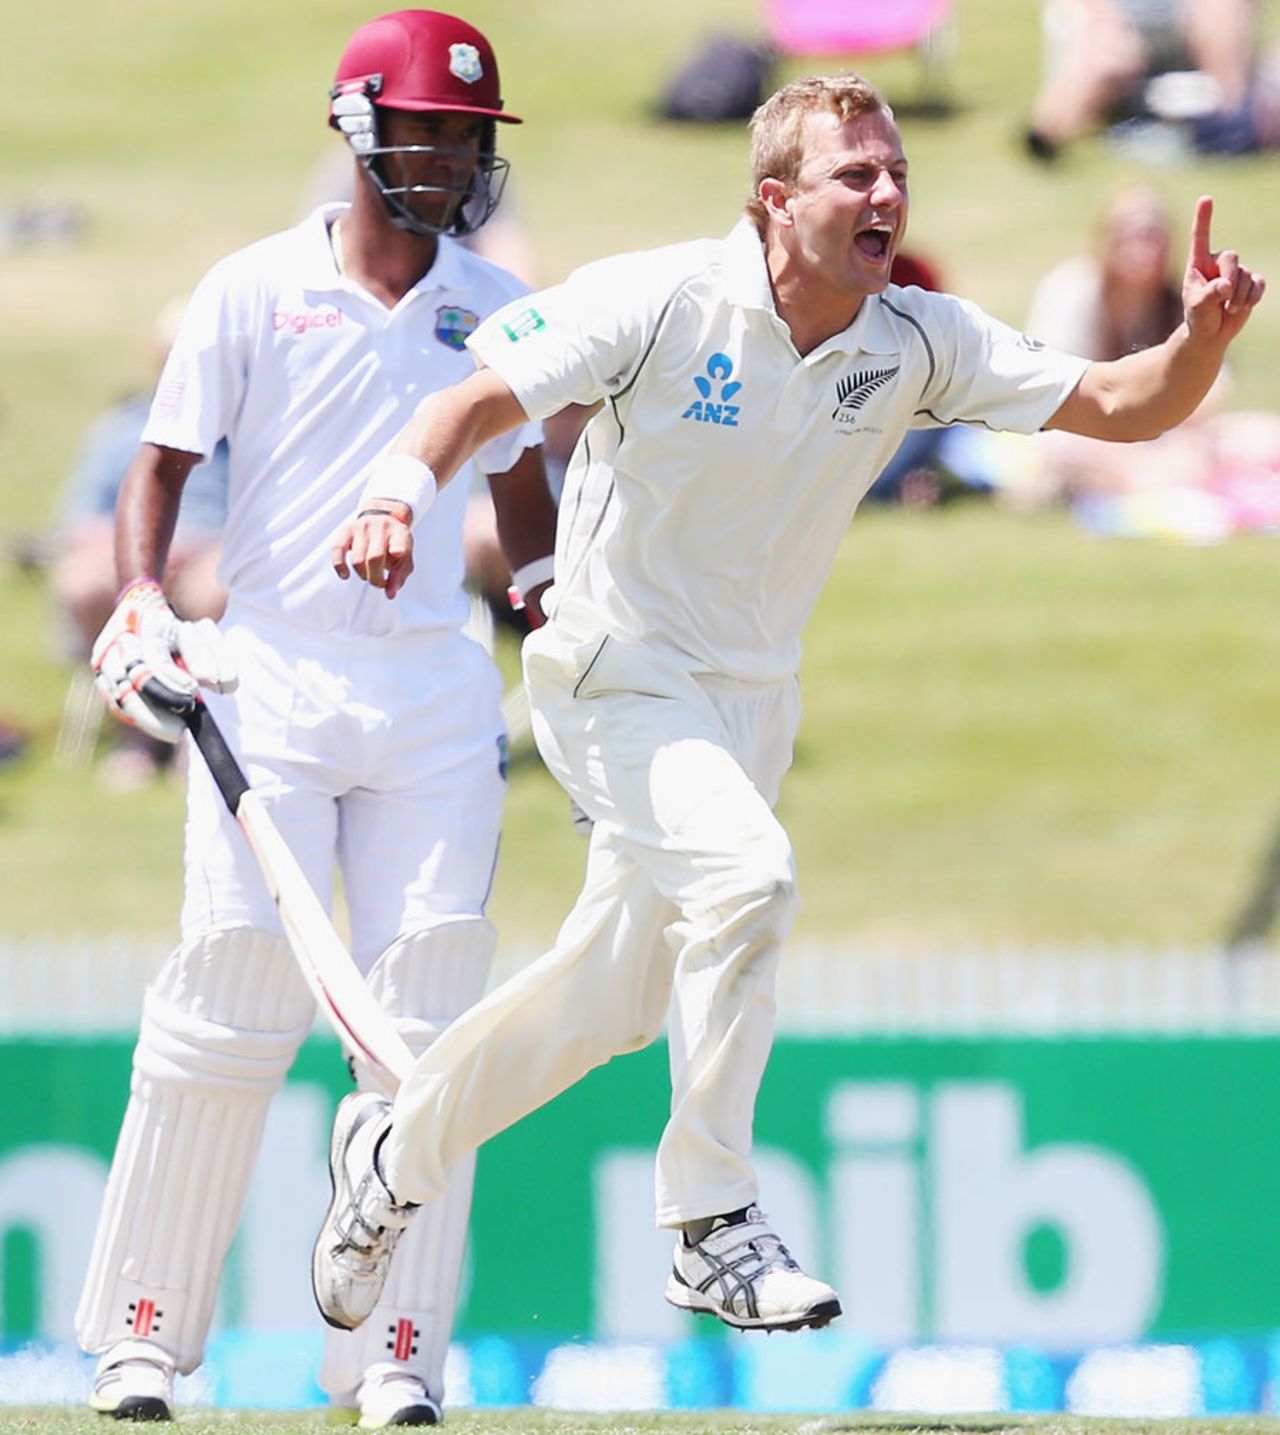 Neil Wagner celebrates a wicket, New Zealand v West Indies, 3rd Test, Hamilton, 1st day, December 19, 2013